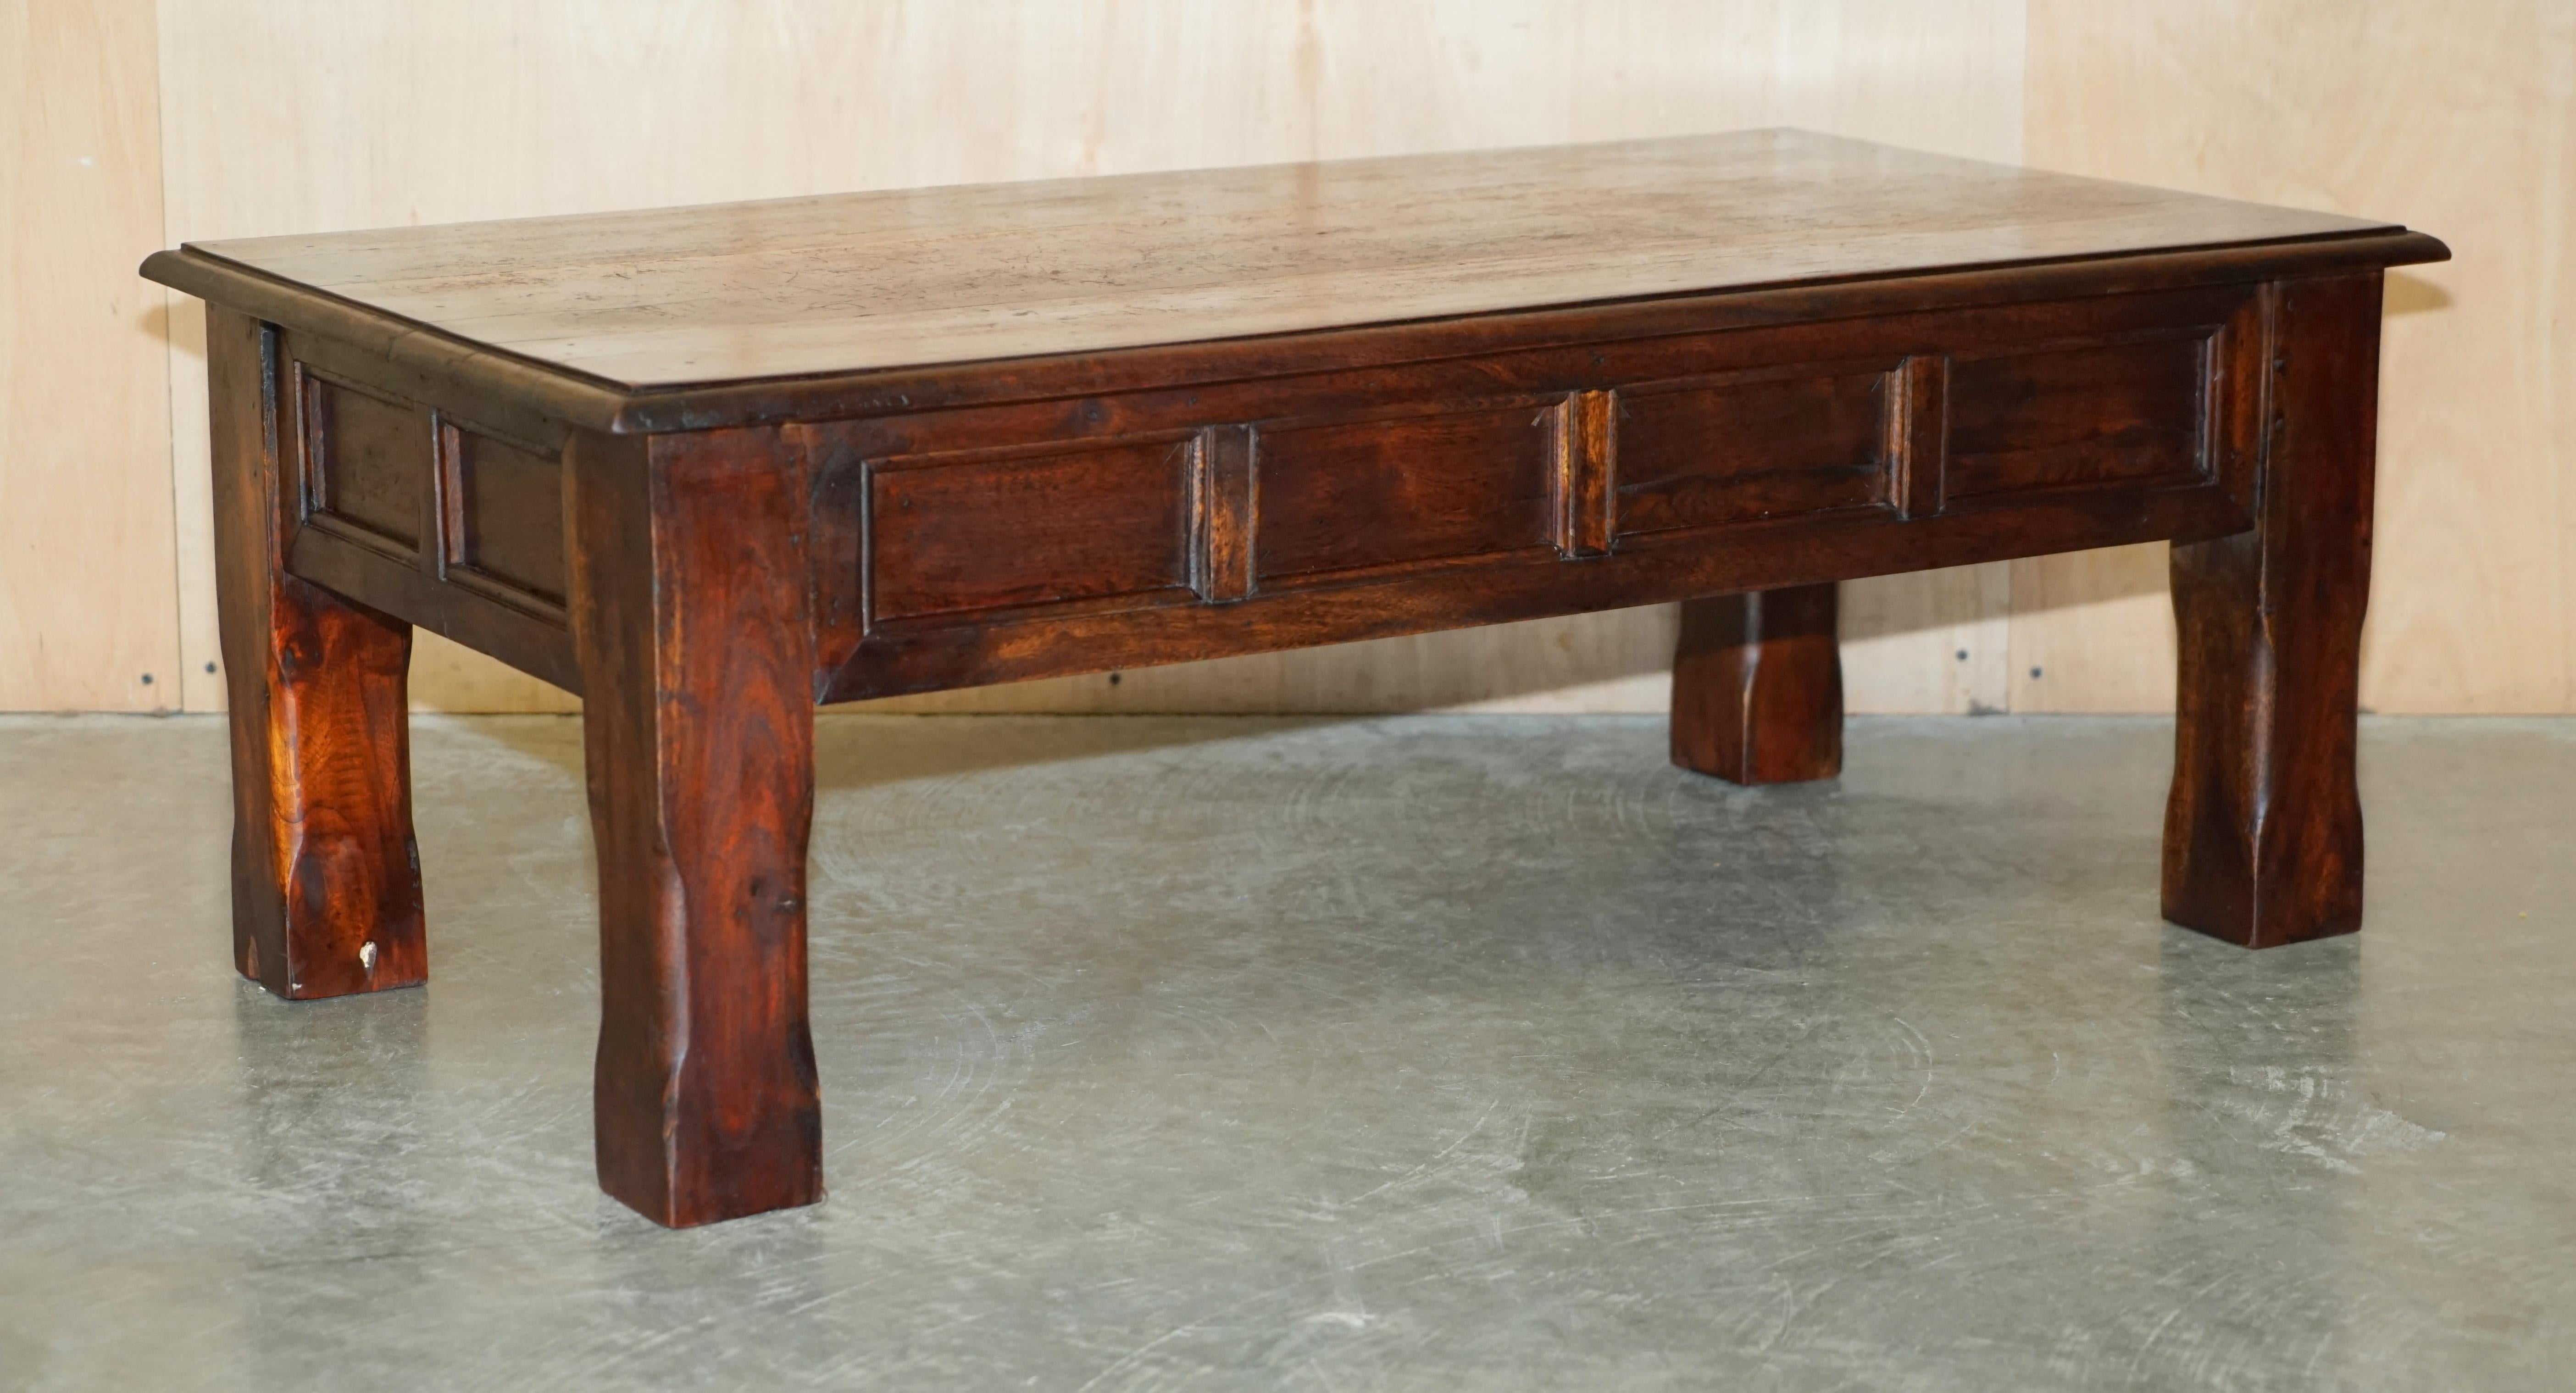 We are delighted to offer for sale this nicely made pair of oak coffee tables.

I have three of these in stock, this sale is for the pair with the single one being listed under my other items.

They are a good looking and chunky pair, we have